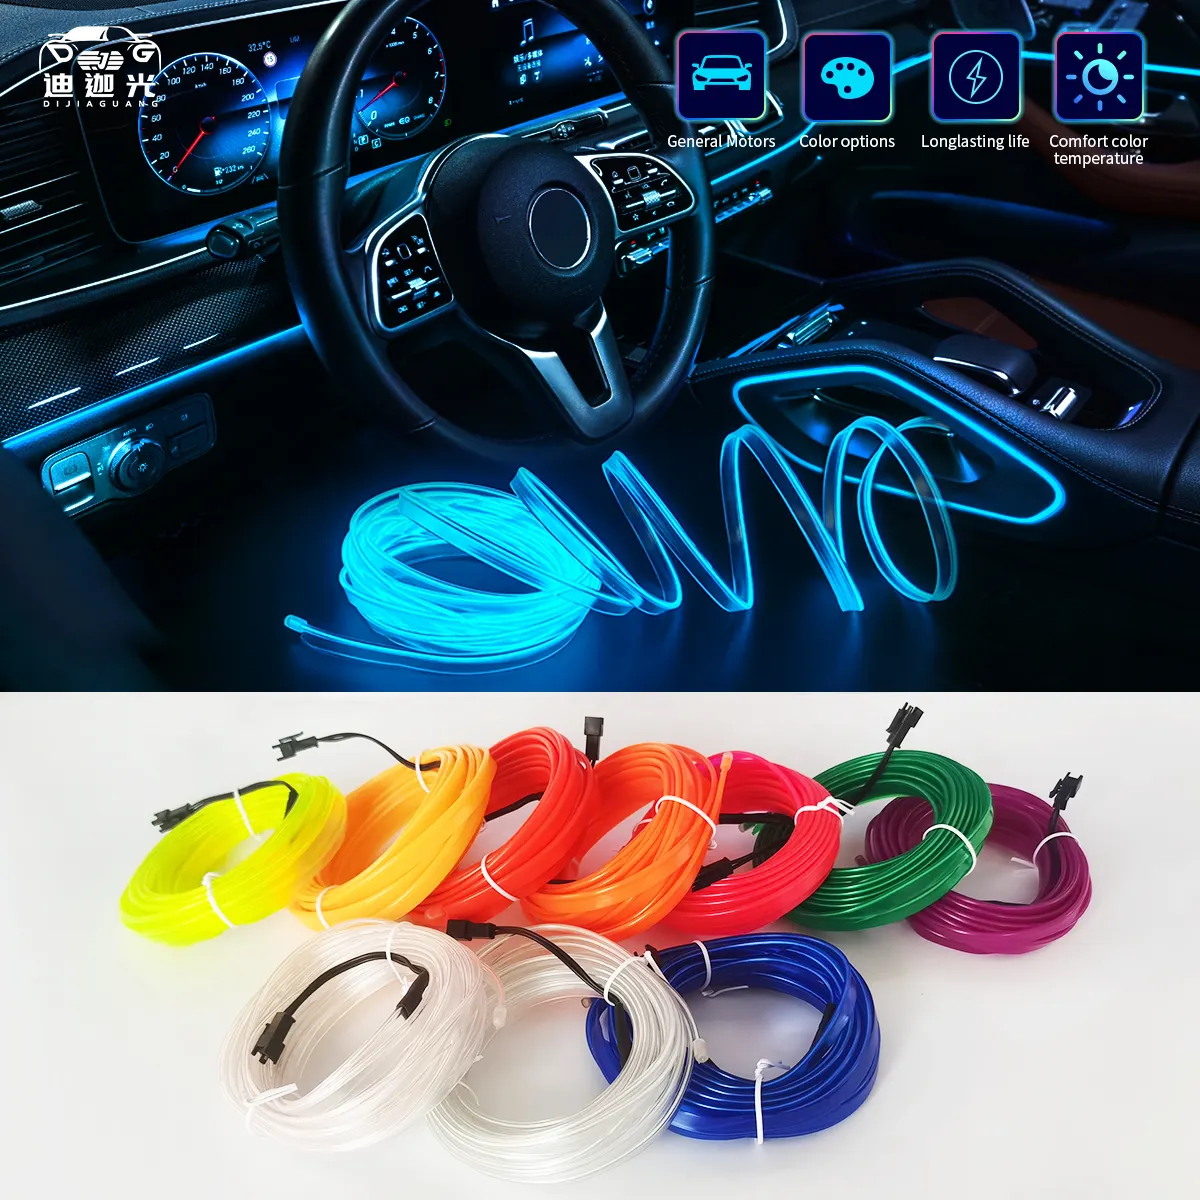 Commercio all'ingrosso 5m EL Wire Car Interior Atmosphere Accent Lighting Decoration kit Car Mood Led Ambient Cold Light Strip